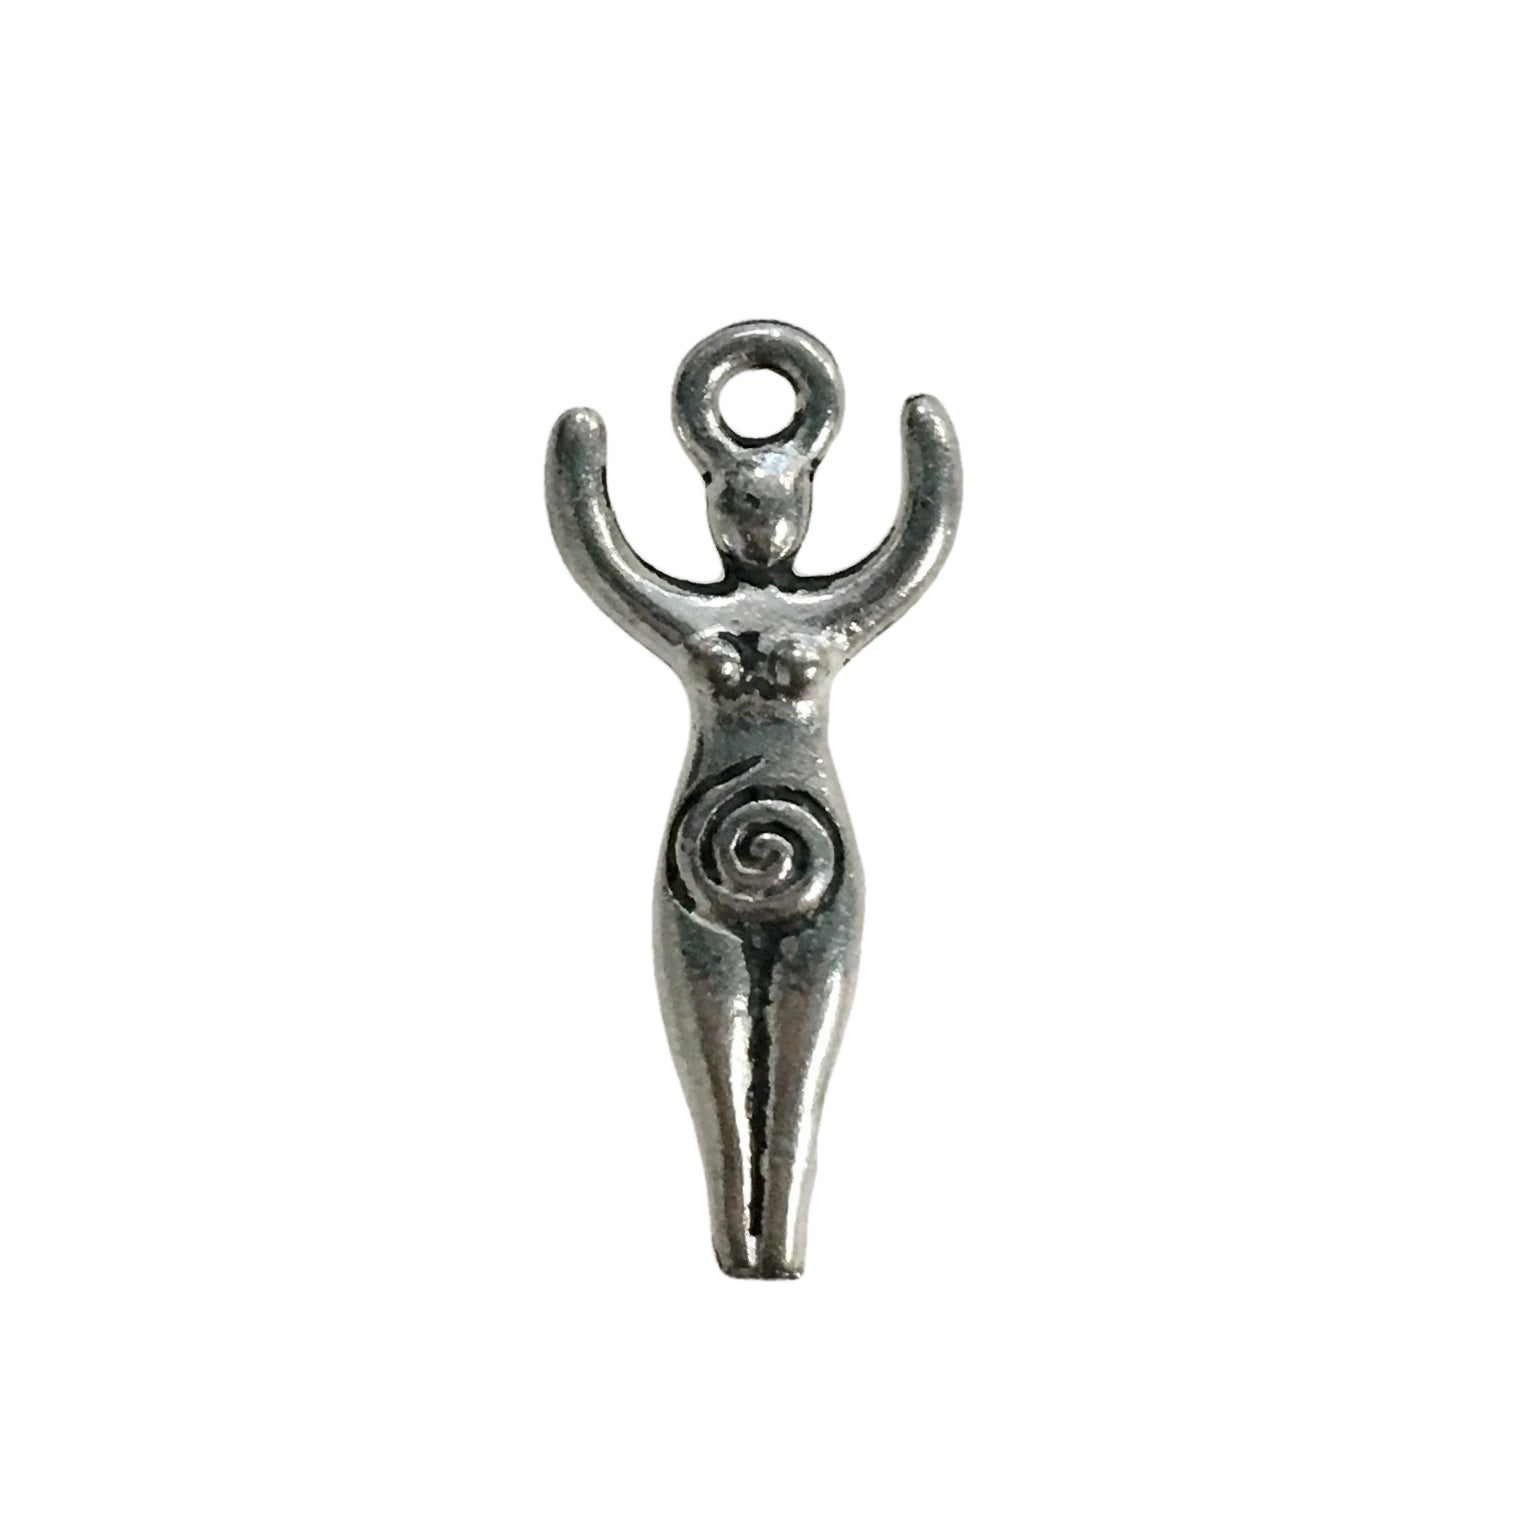 Small Fertility Goddess Charms - Qty of 5 Charms - Lead Free Pewter Silver - American Made